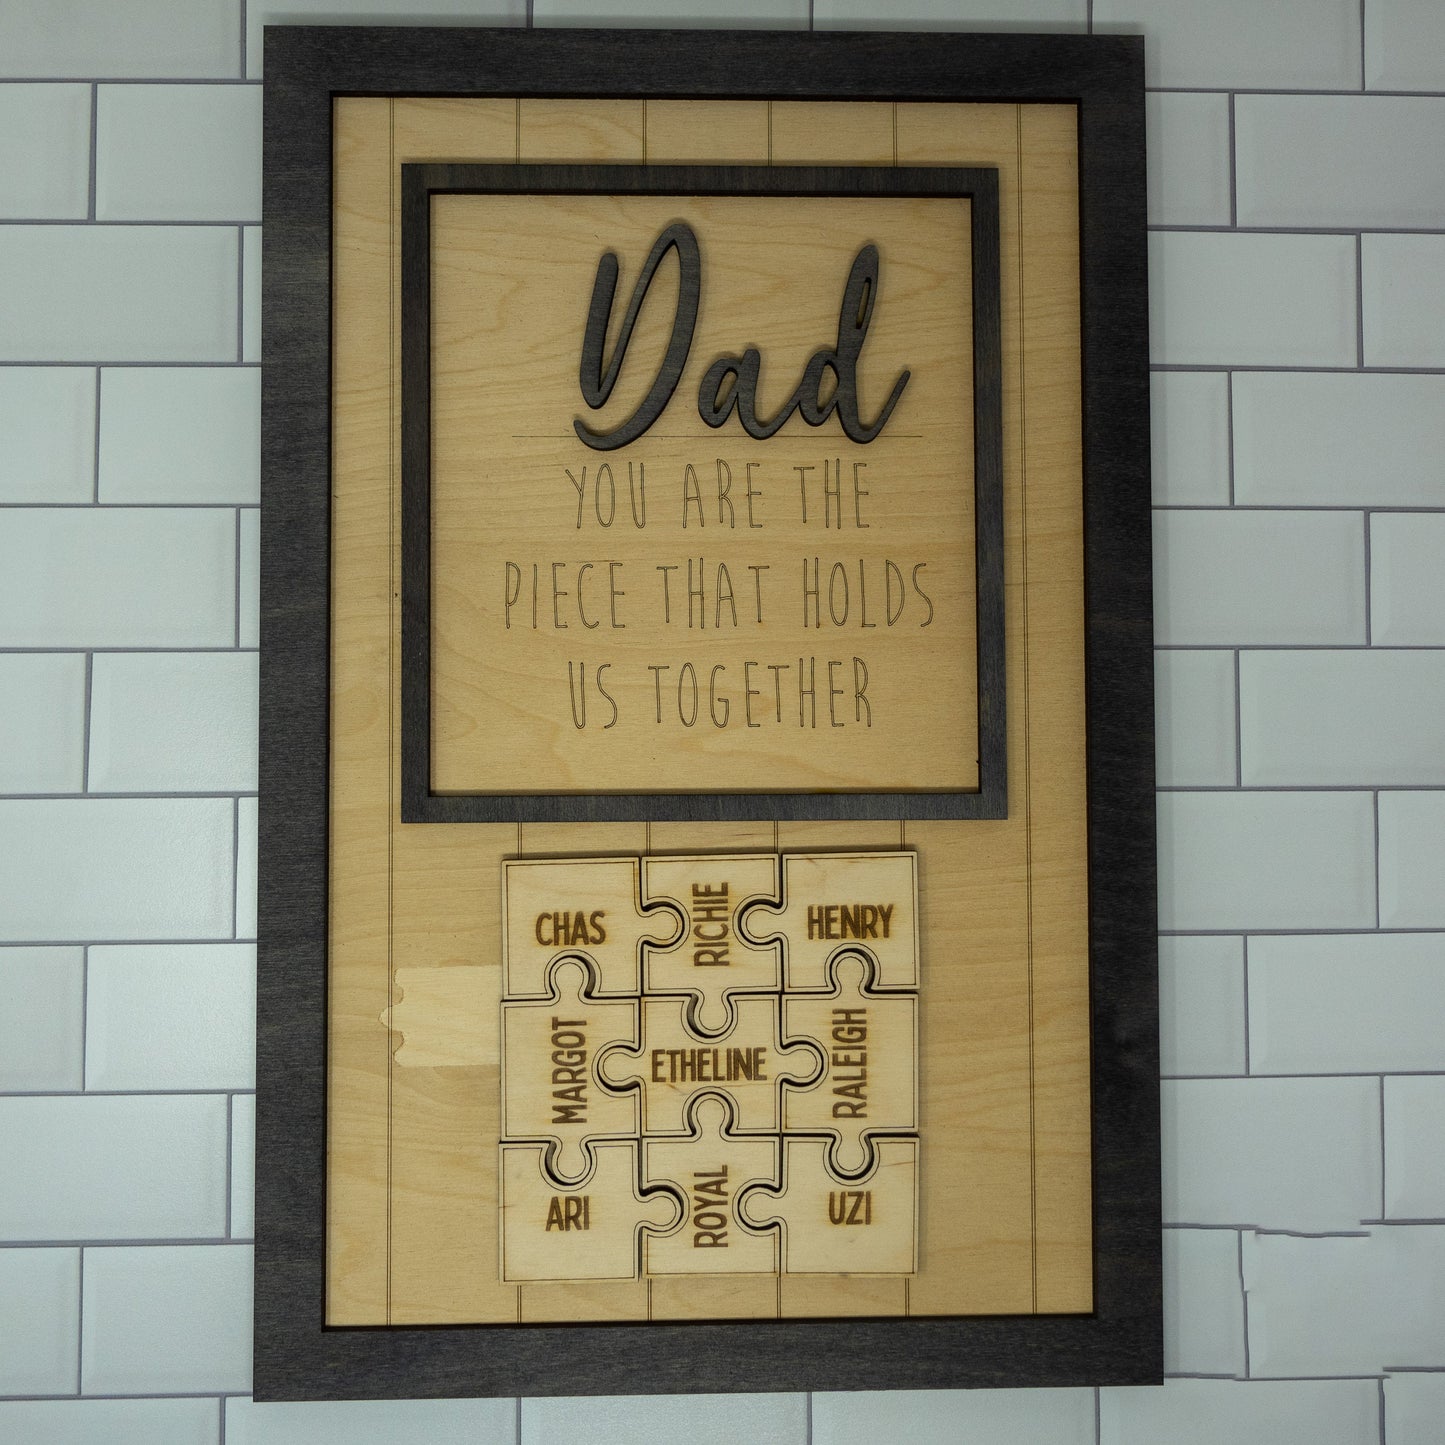 Dad You Are The Piece That Holds Us Together Personalized Dad Jigsaw Puzzle Pieces, Fathers Day Gift, Gifts For Dad